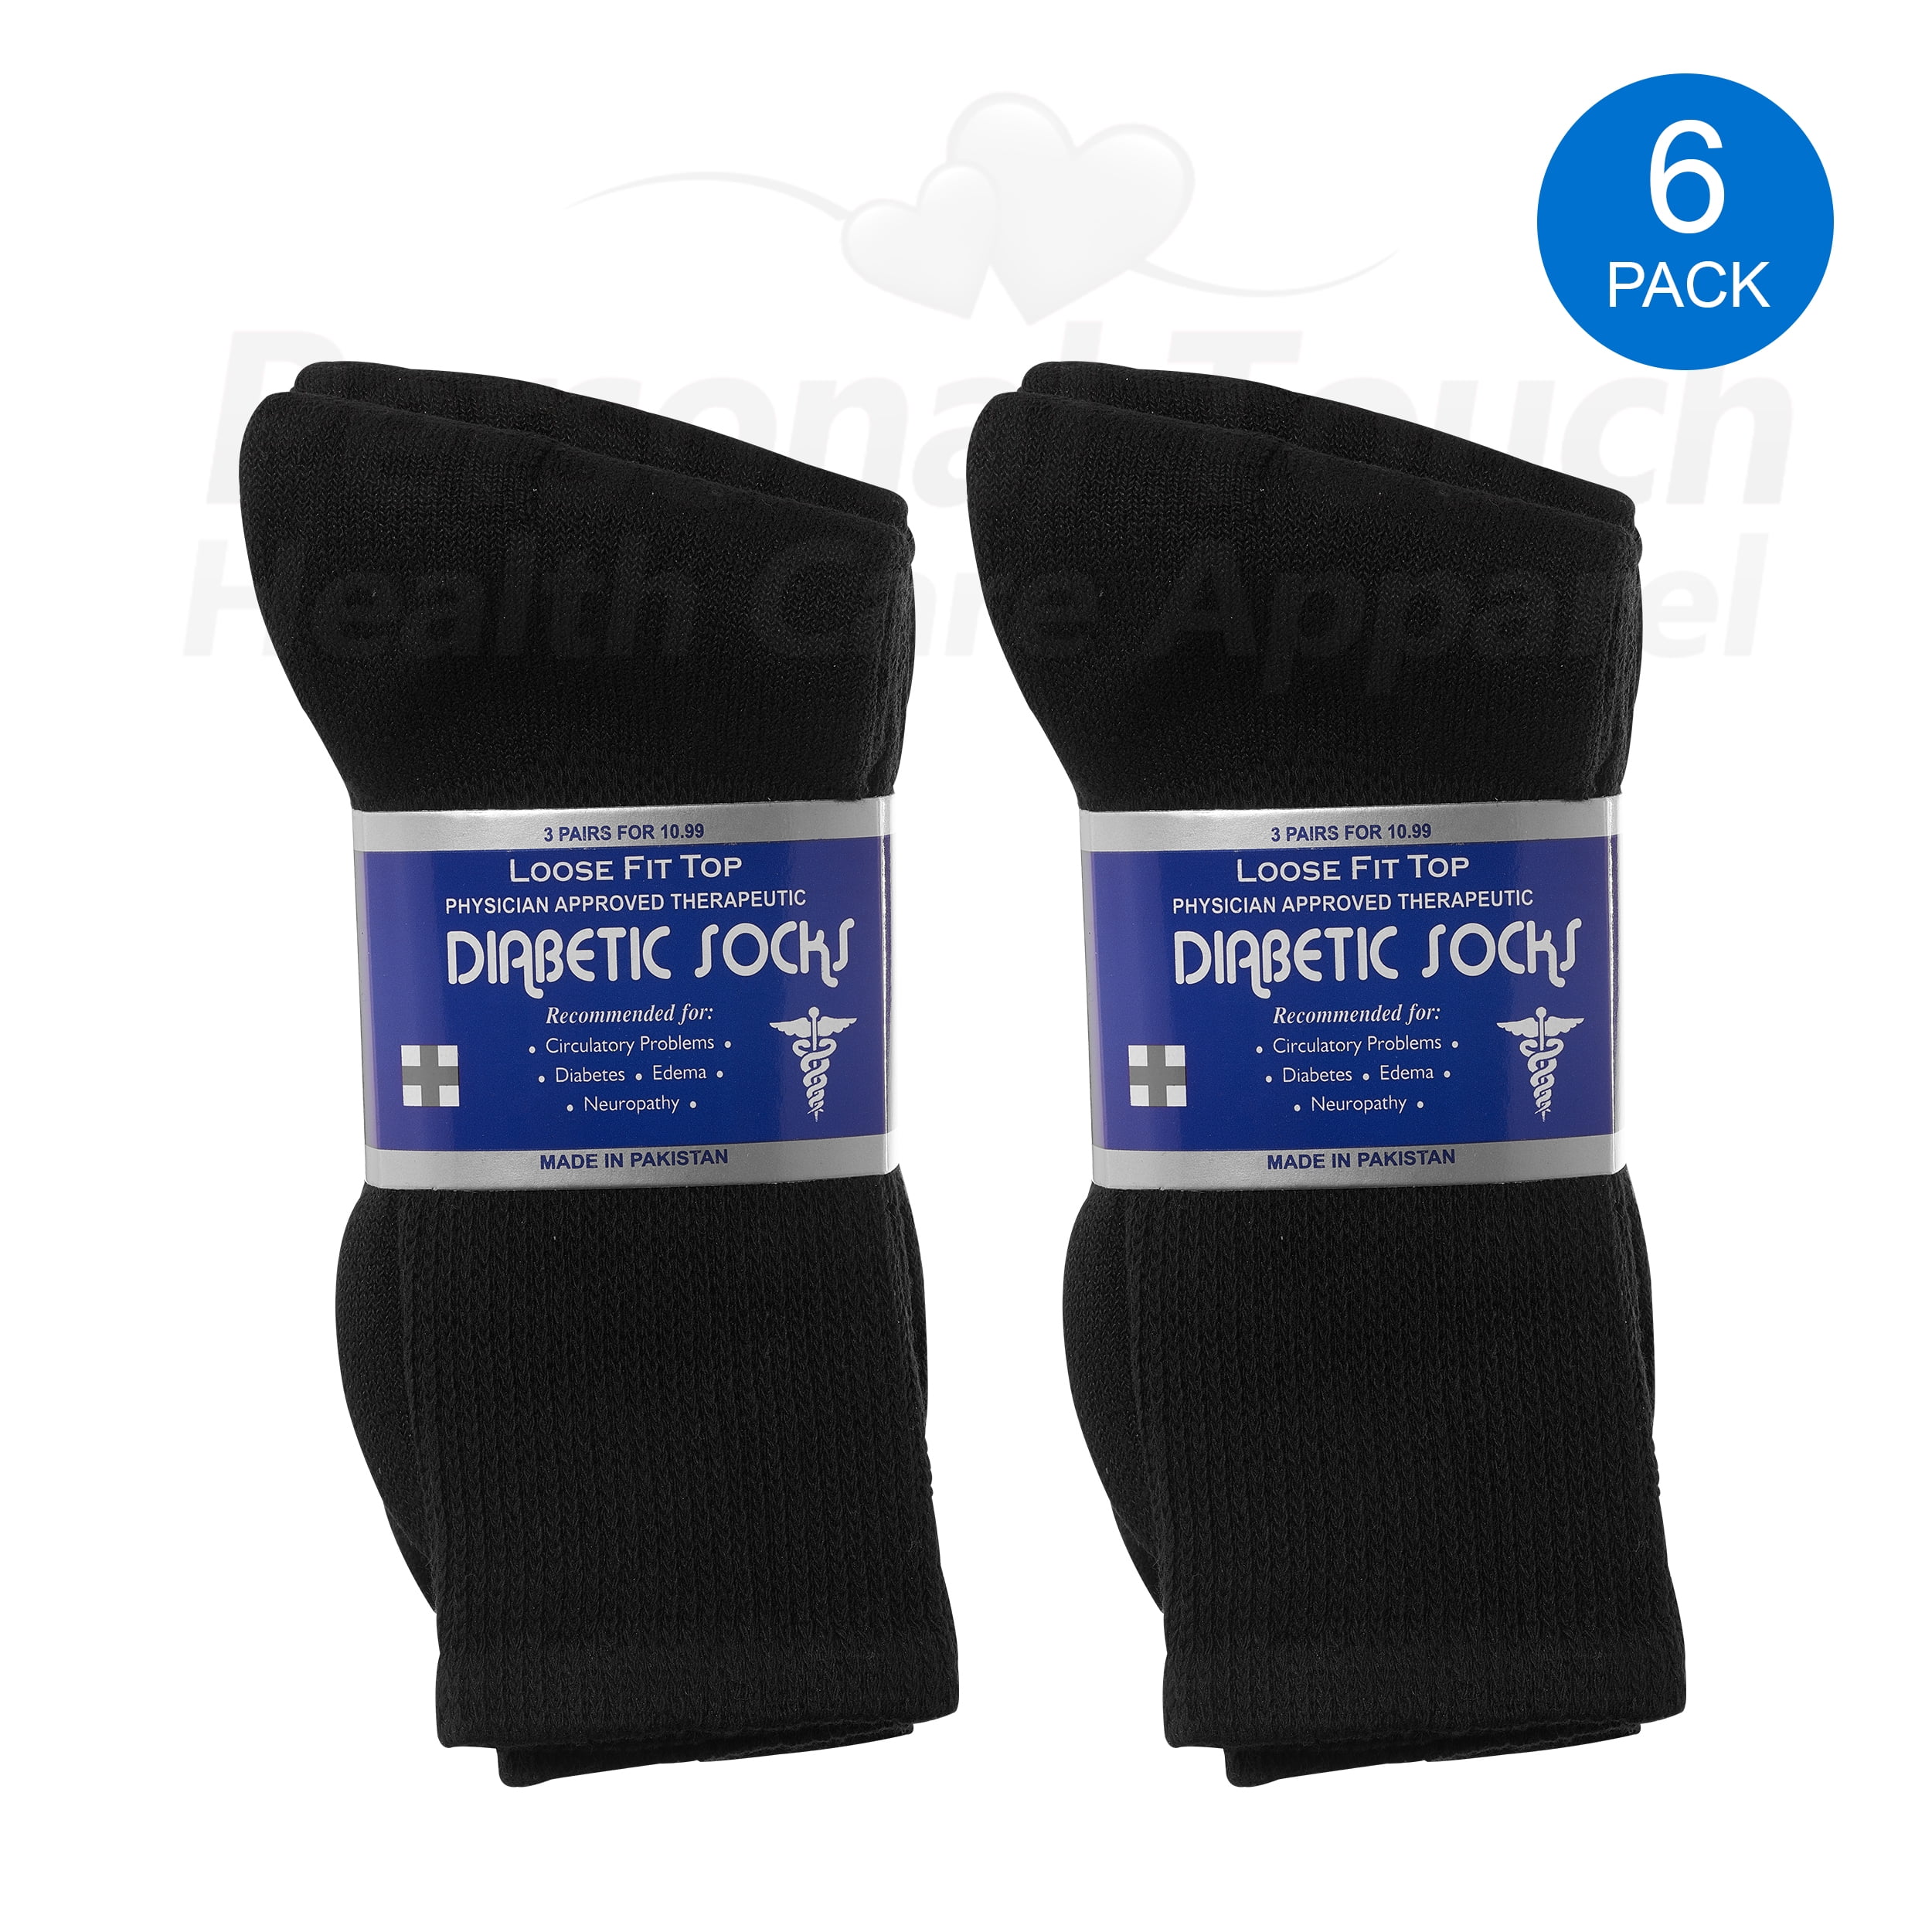 BEST QUALITY 12 PAIR OF BLACK DIABETIC CREW SOCKS SIZE 9-11 MADE IN USA 